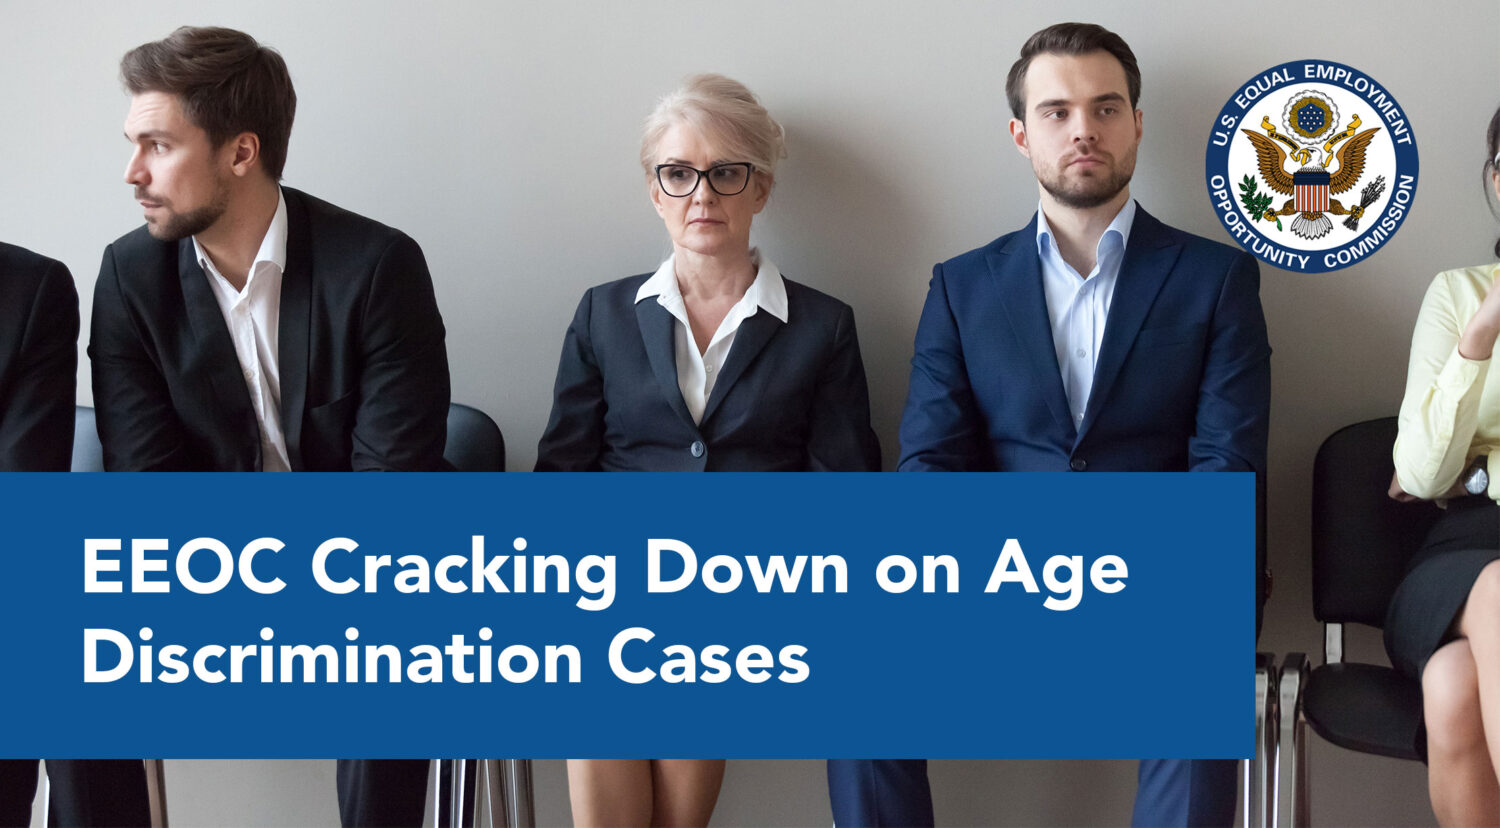 EEOC Cracking Down on Age Discrimination Cases